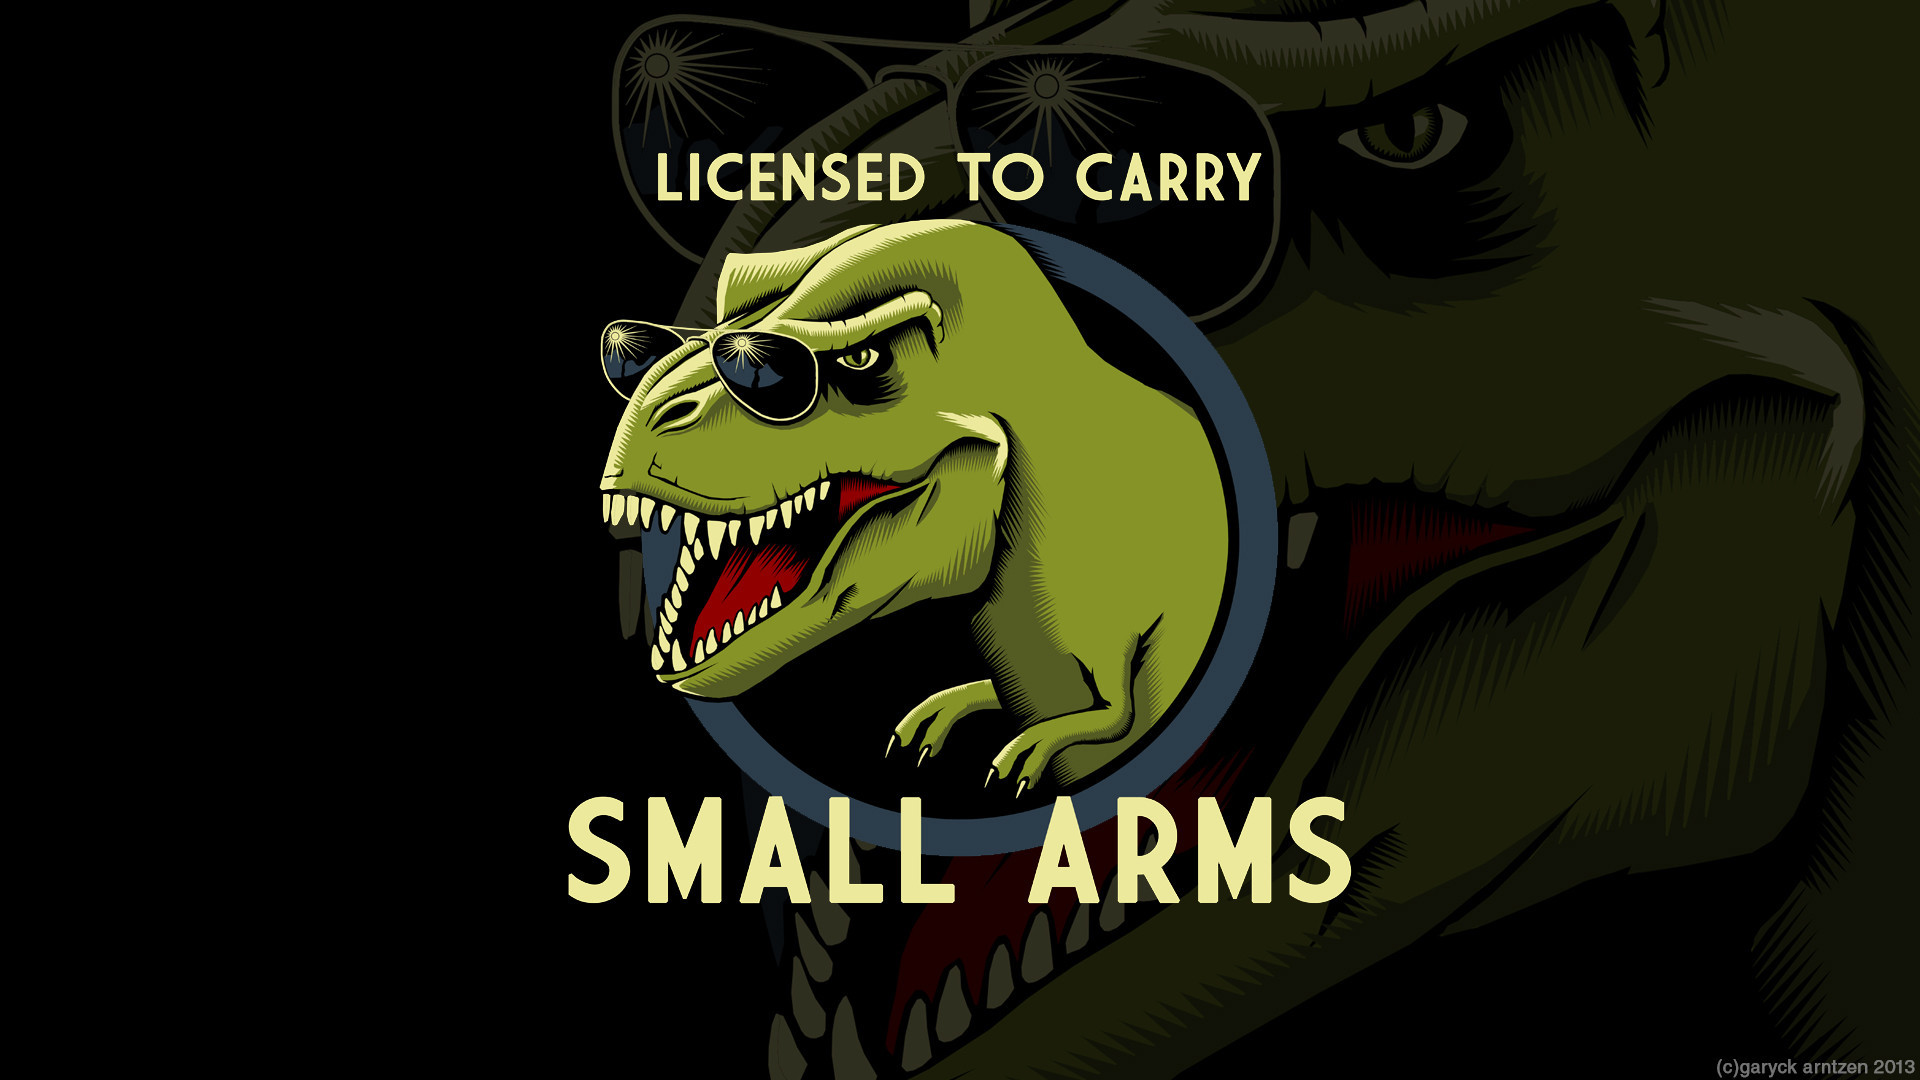 1920x1080 [Dino Art] Wallpaper: T-Rex "licensed to carry small arms" - funny ...